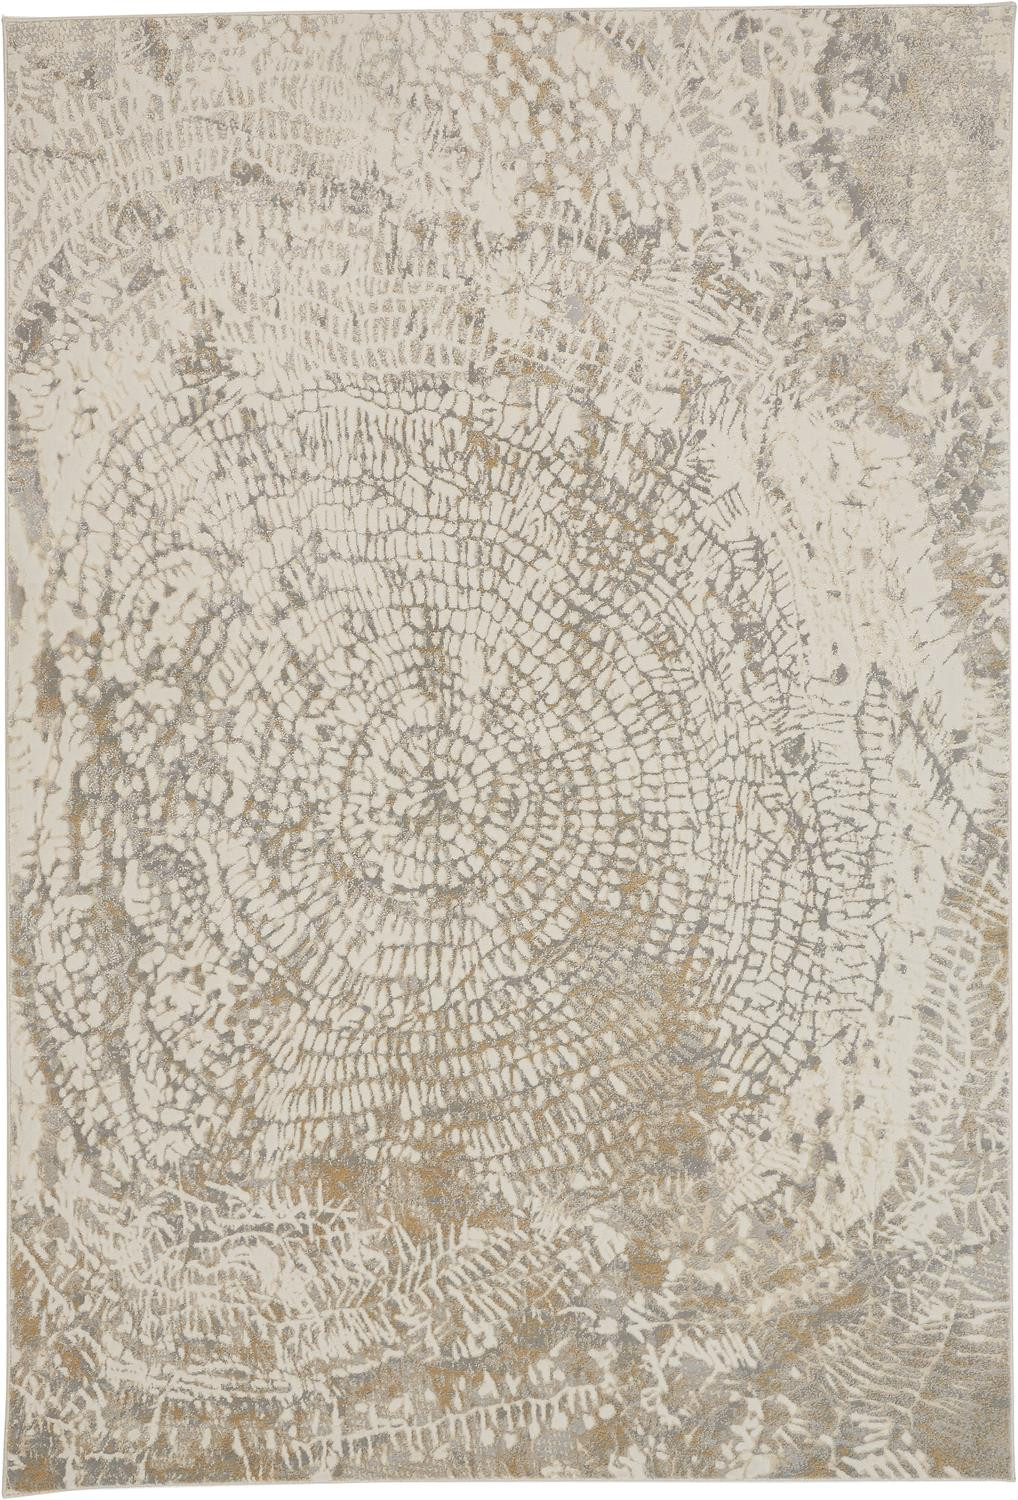 12' X 15' Ivory Tan And Gray Abstract Area Rug-514701-1